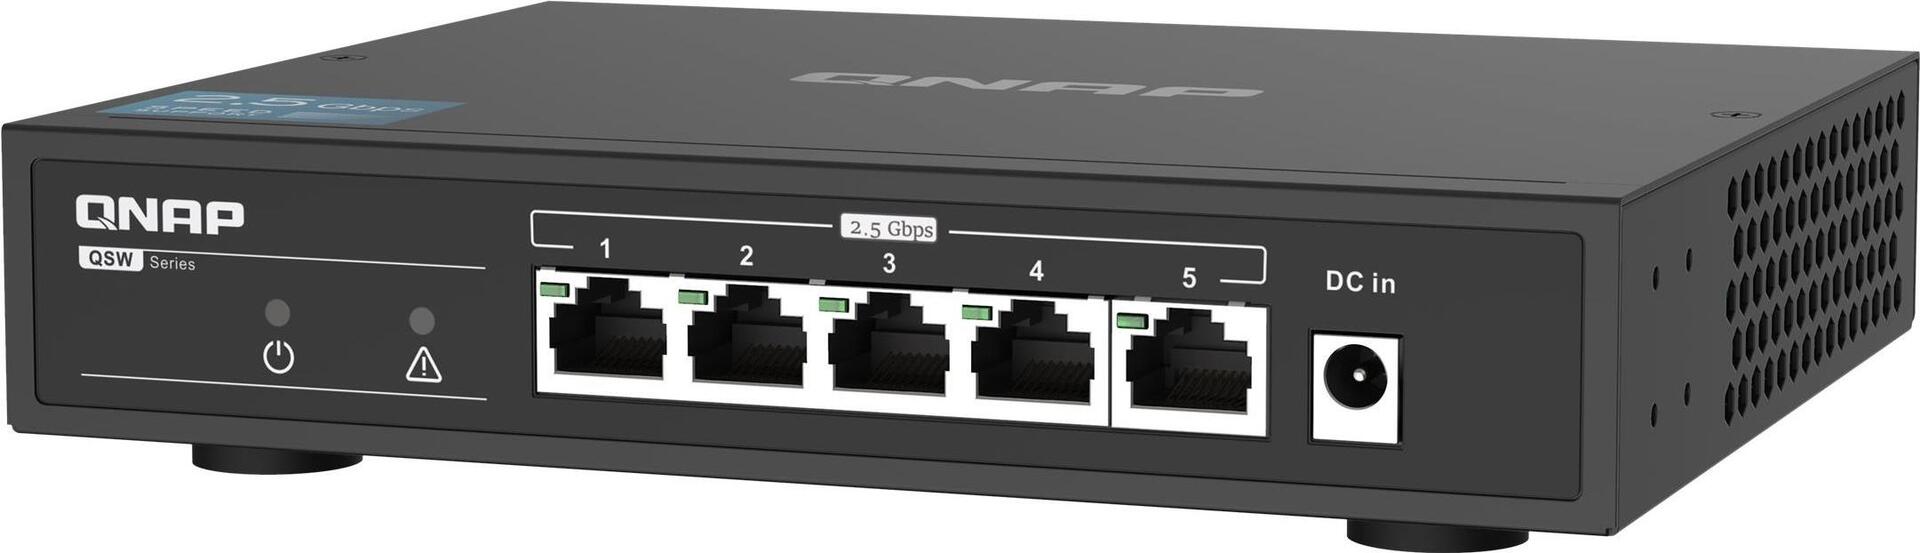 QNAP QSW-1105-5T Switch (QSW-1105-5T)